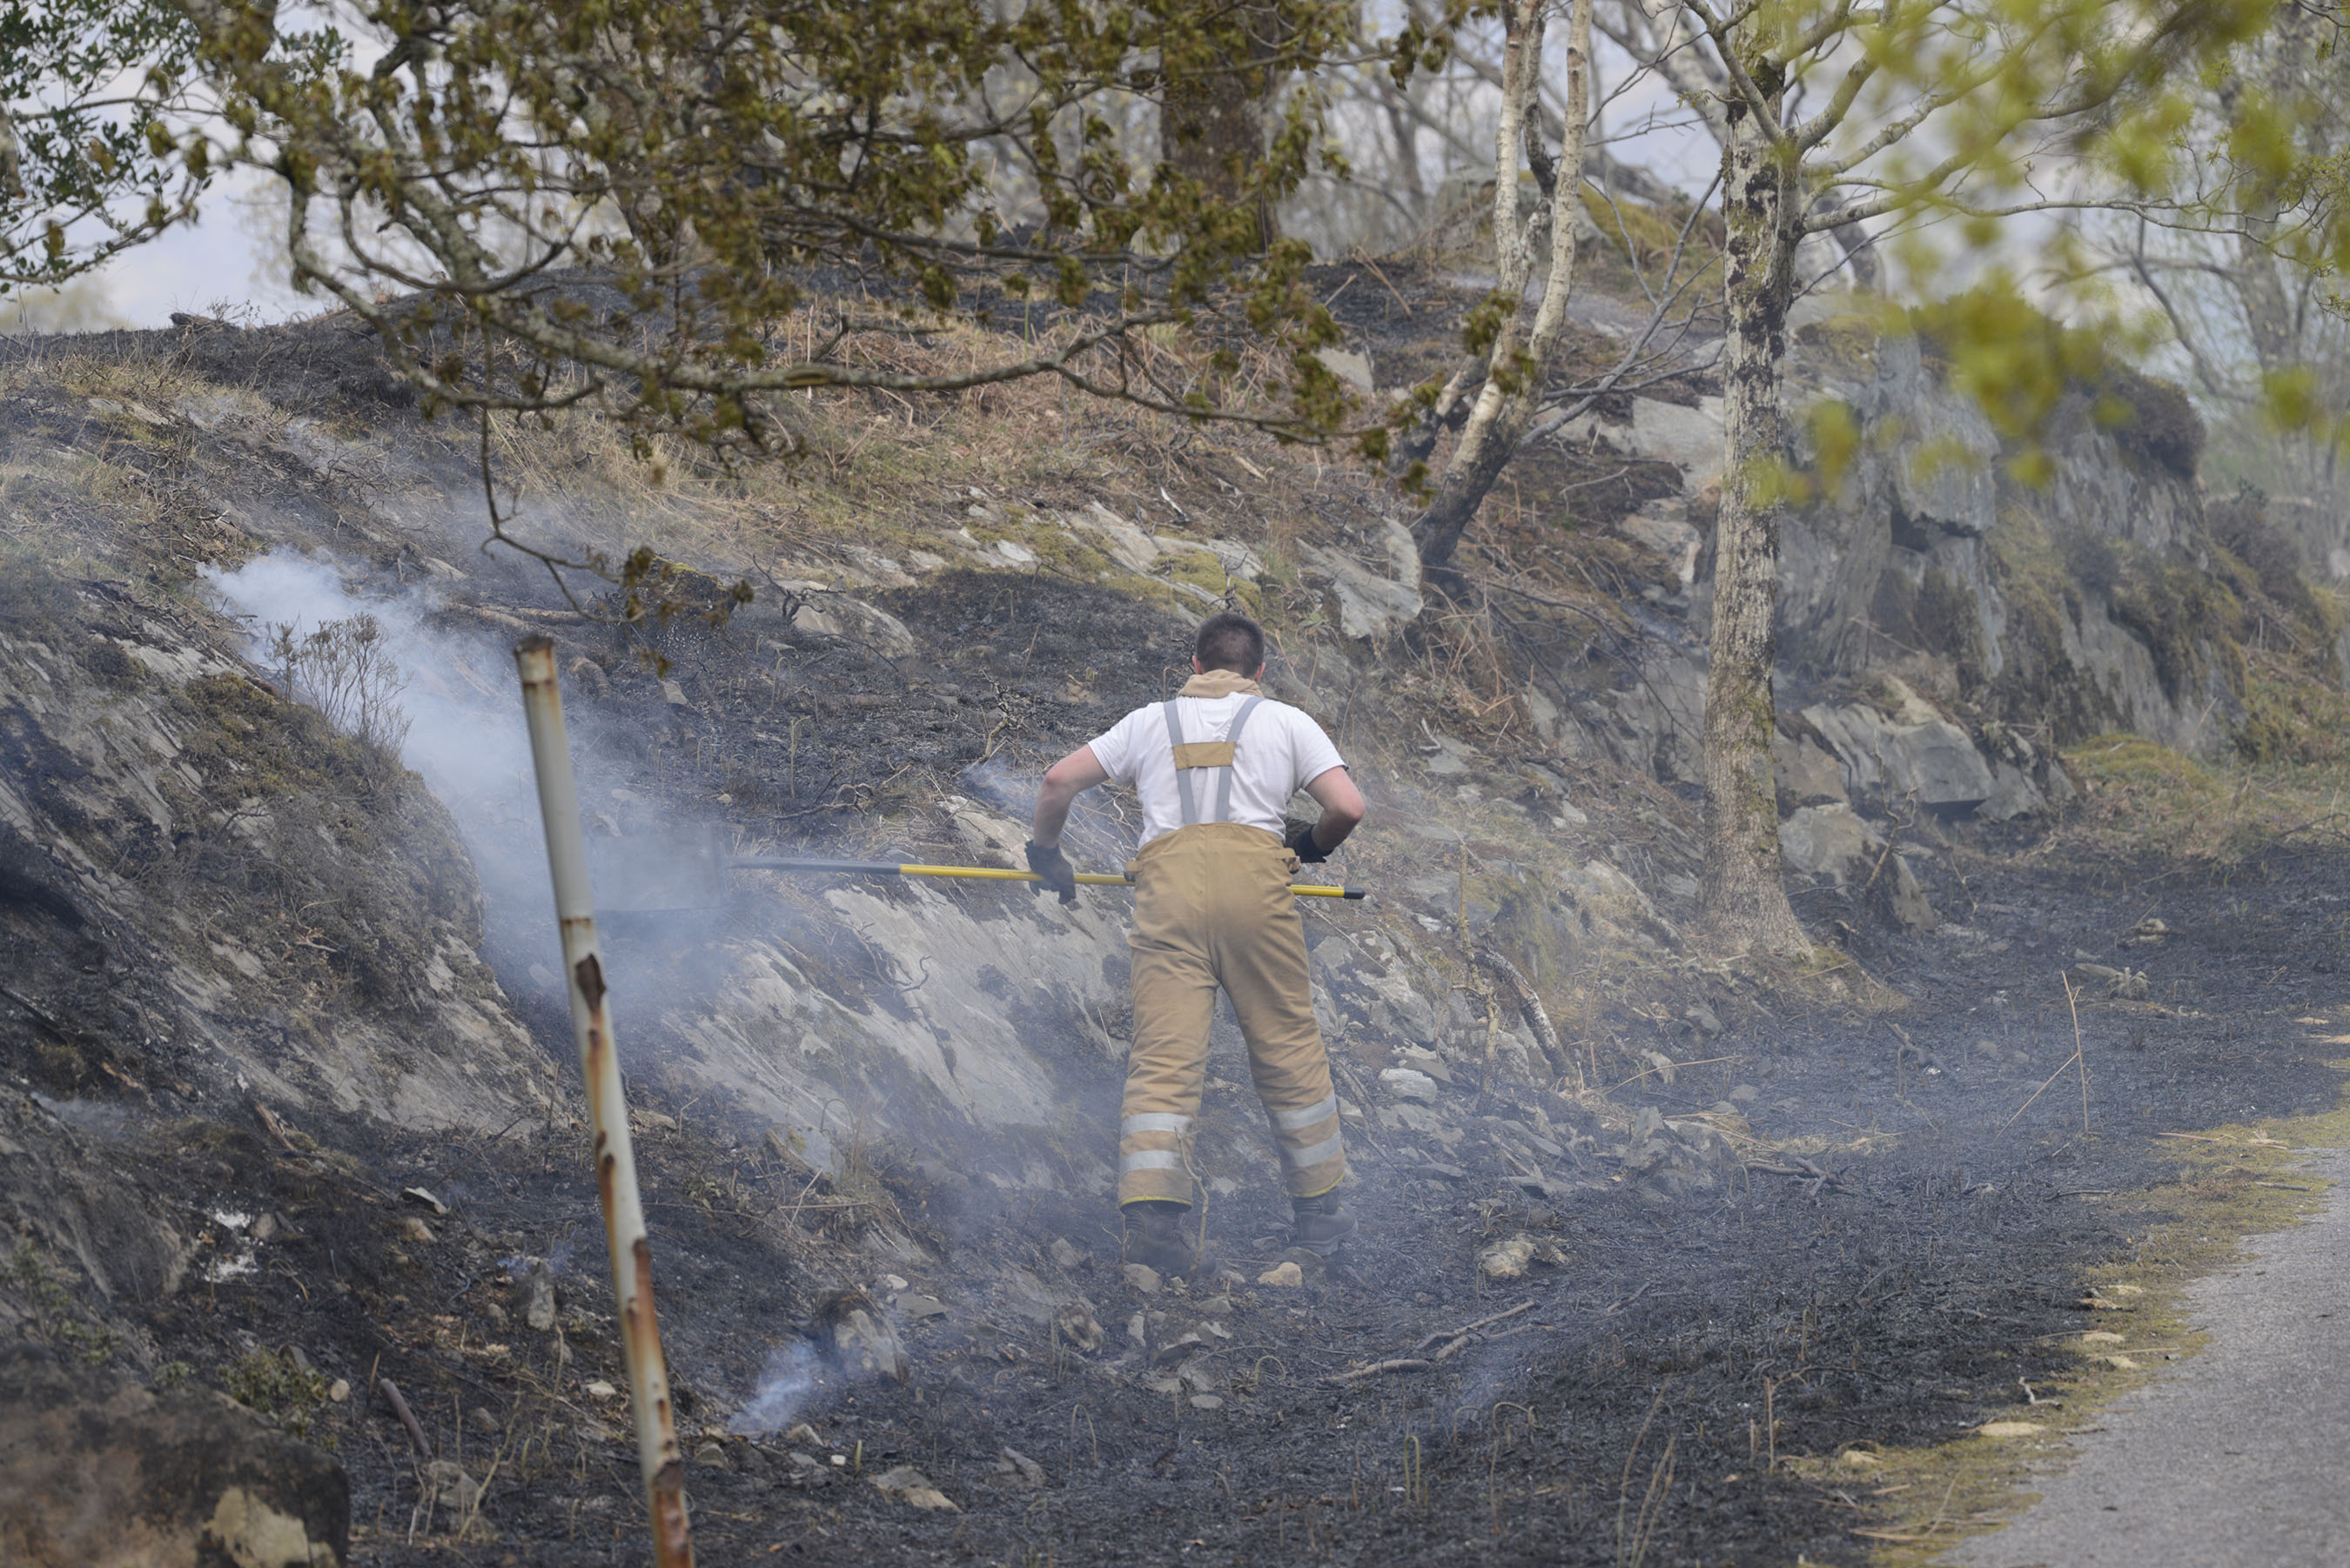 A firefighter works on keeping the flames from breaking out again in the fire ravaged glens between Lochailort and Morar.